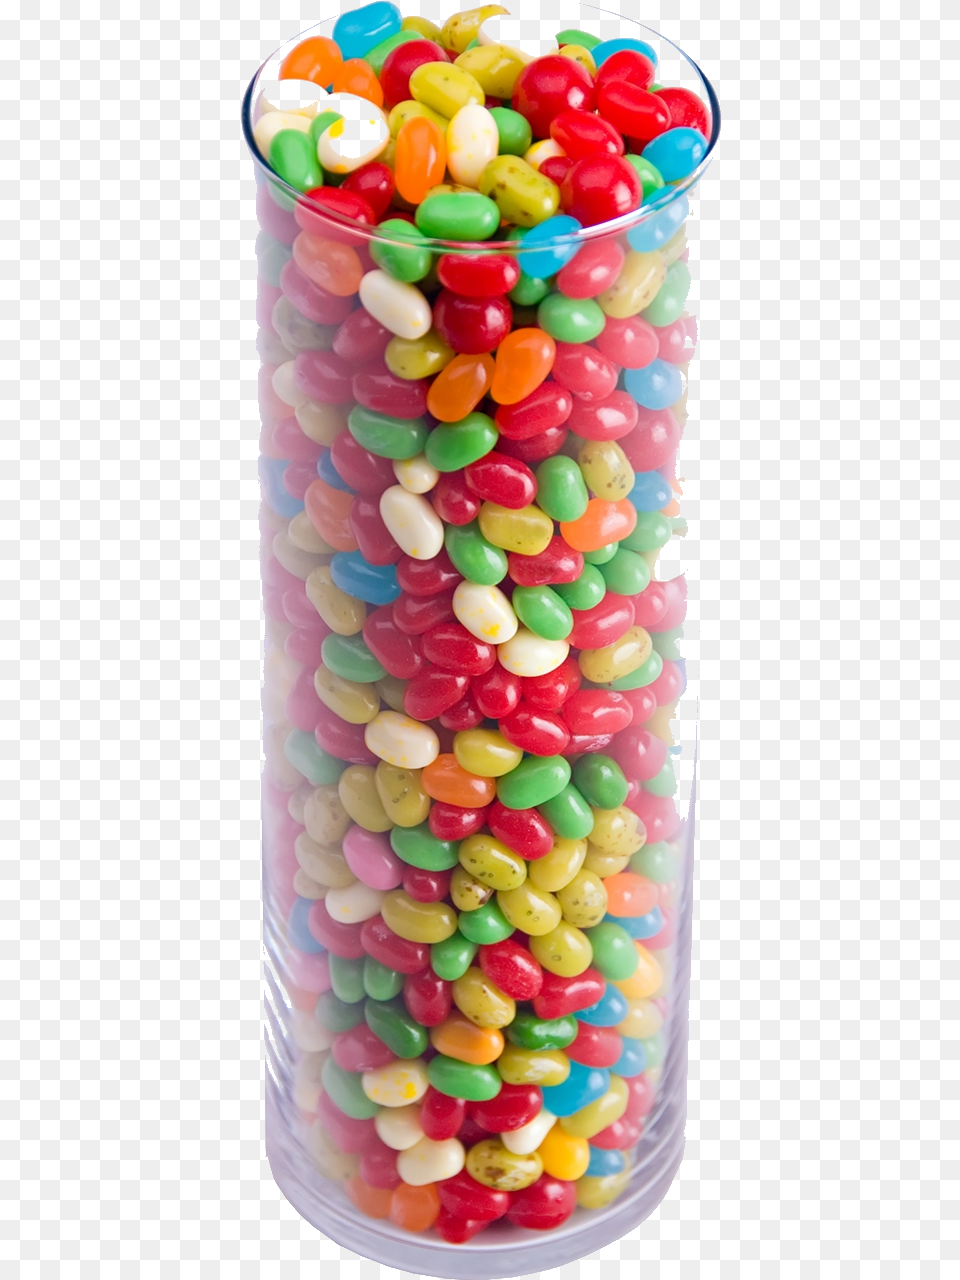 Jar Of Candy Clipart Sprinkle Many Sweets In Hd Transparent Many Sweets In The Jar, Food, Jelly, Cream, Dessert Free Png Download